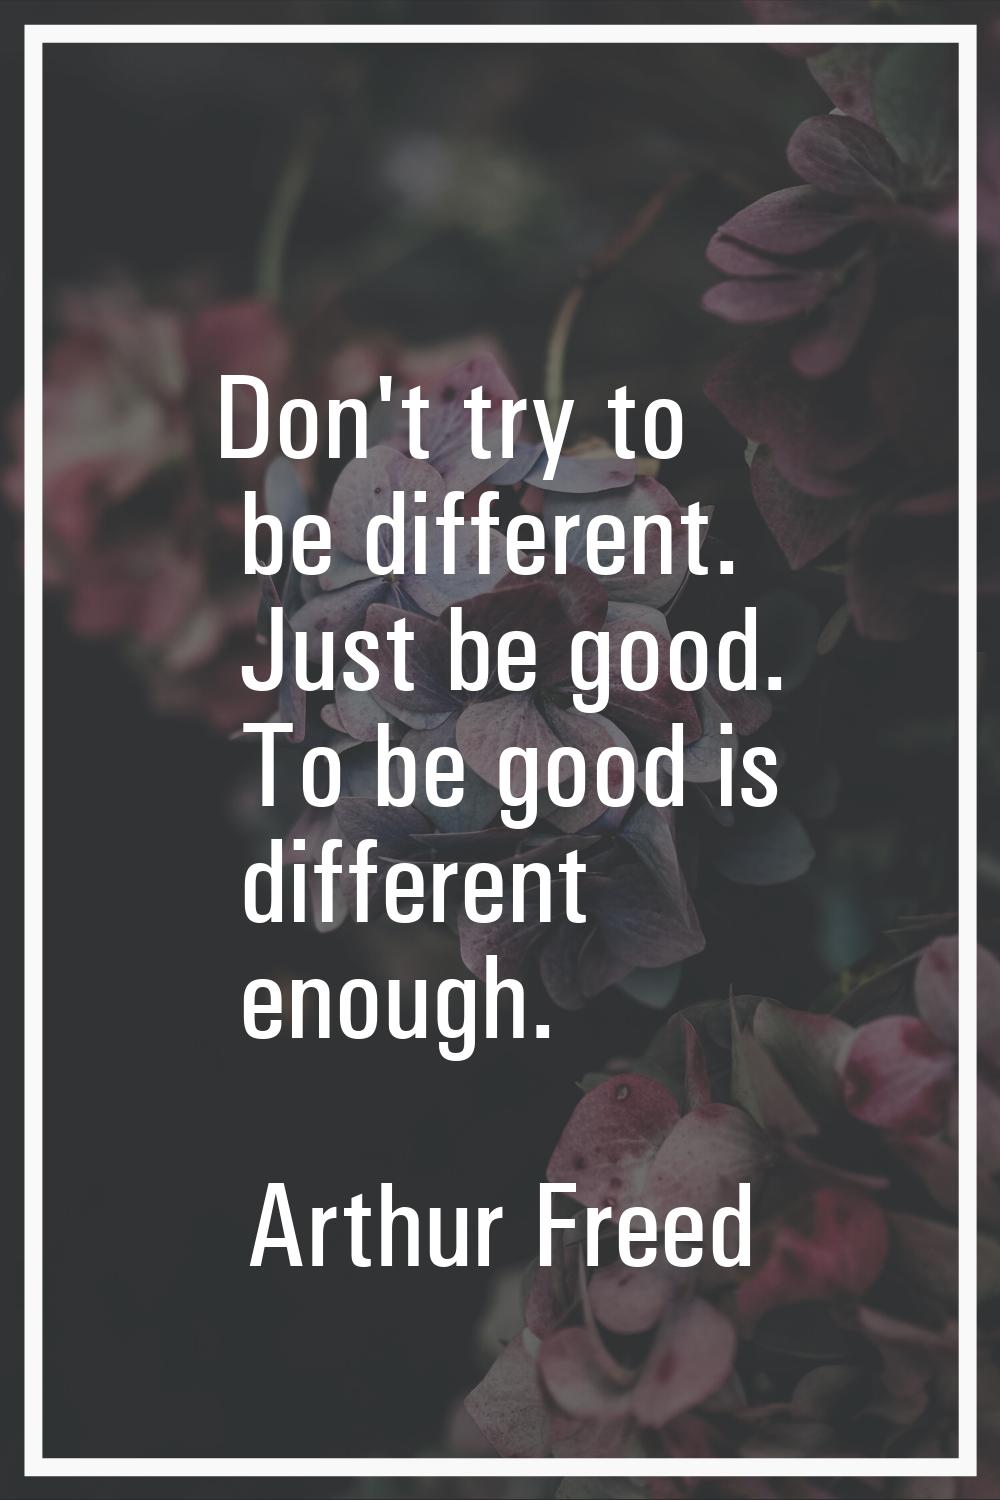 Don't try to be different. Just be good. To be good is different enough.